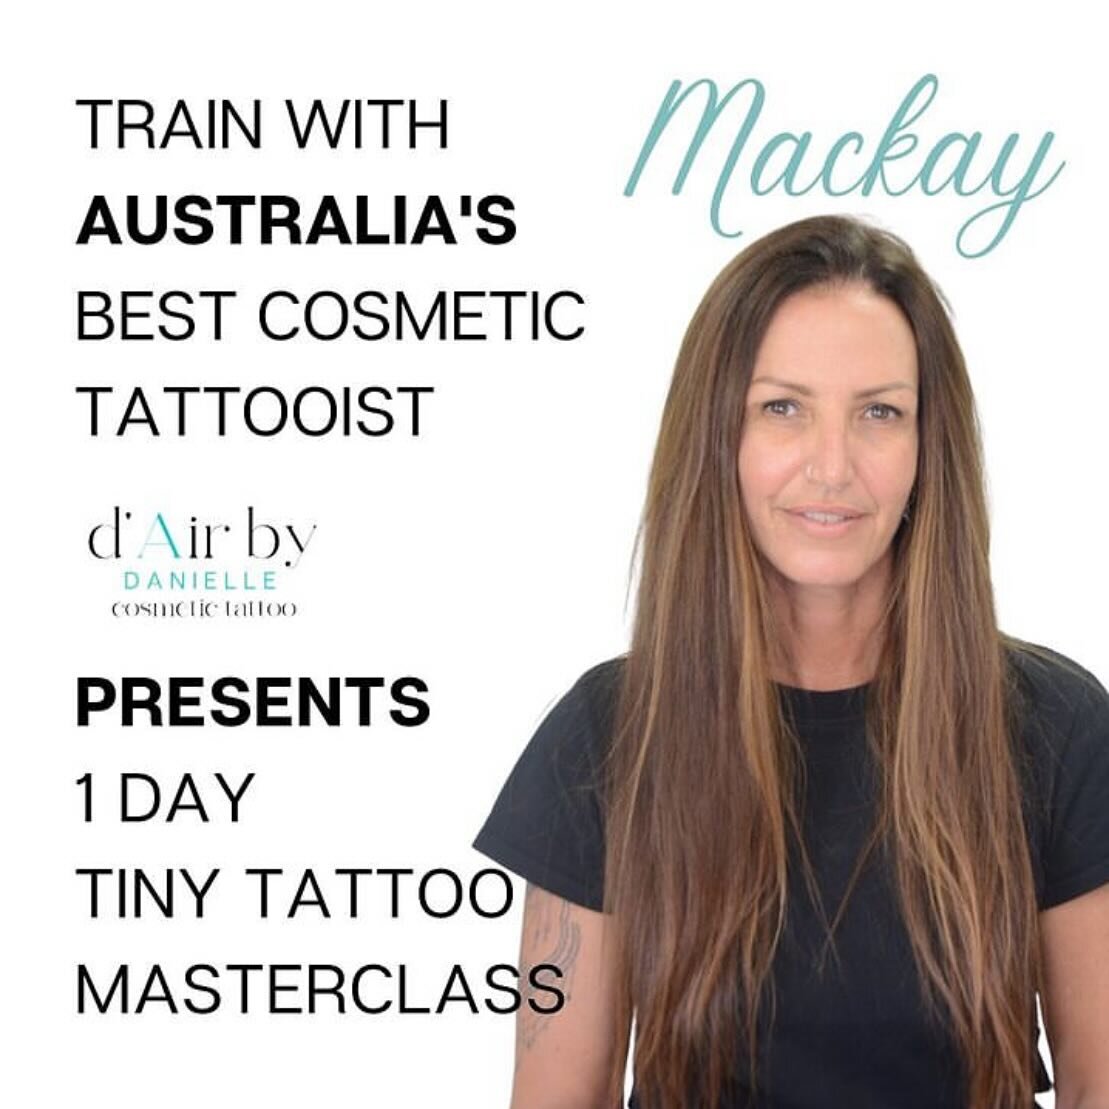 CALLING ALL COSMETIC TATTOOISTS IN MACKAY

This ones especially for you ☝️

Release your creativity with the tools you already possess in my one day fine line tiny tattoo masterclass.

Learn all the ins and out if this popular service so you can conf